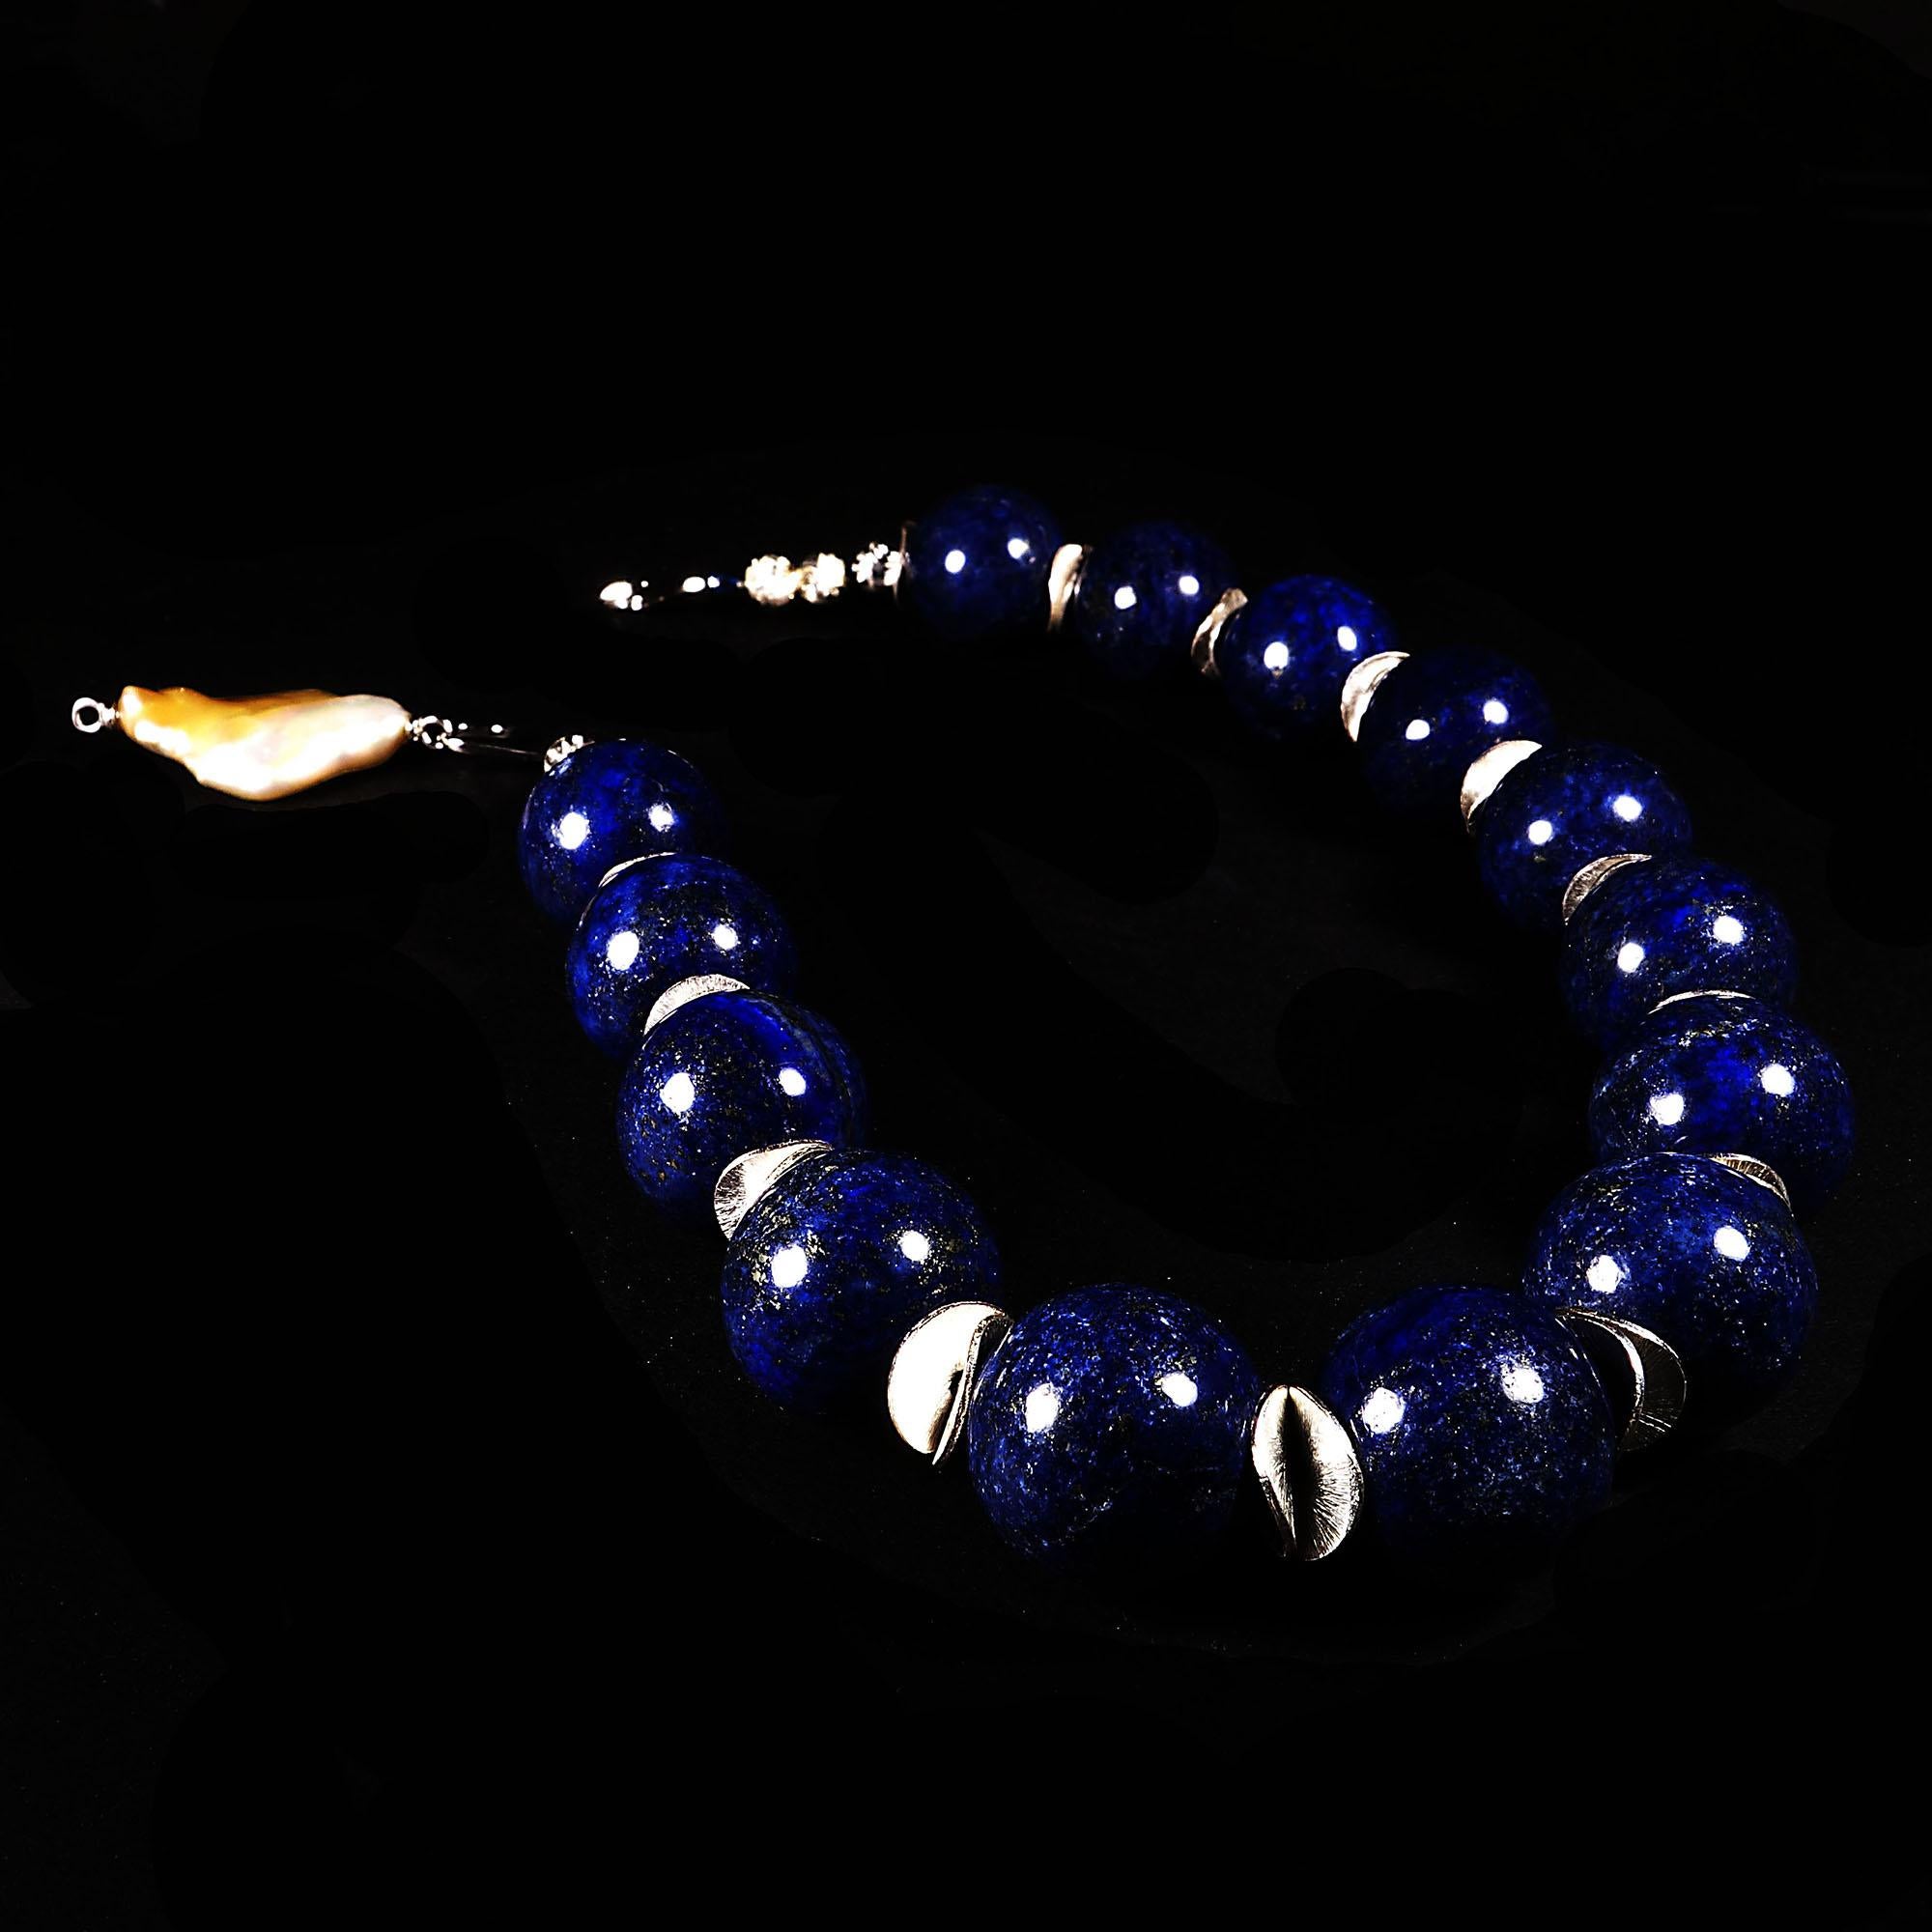 Women's or Men's AJD Choker Necklace of Large Lapis Lazuli Spheres with Silver Accents